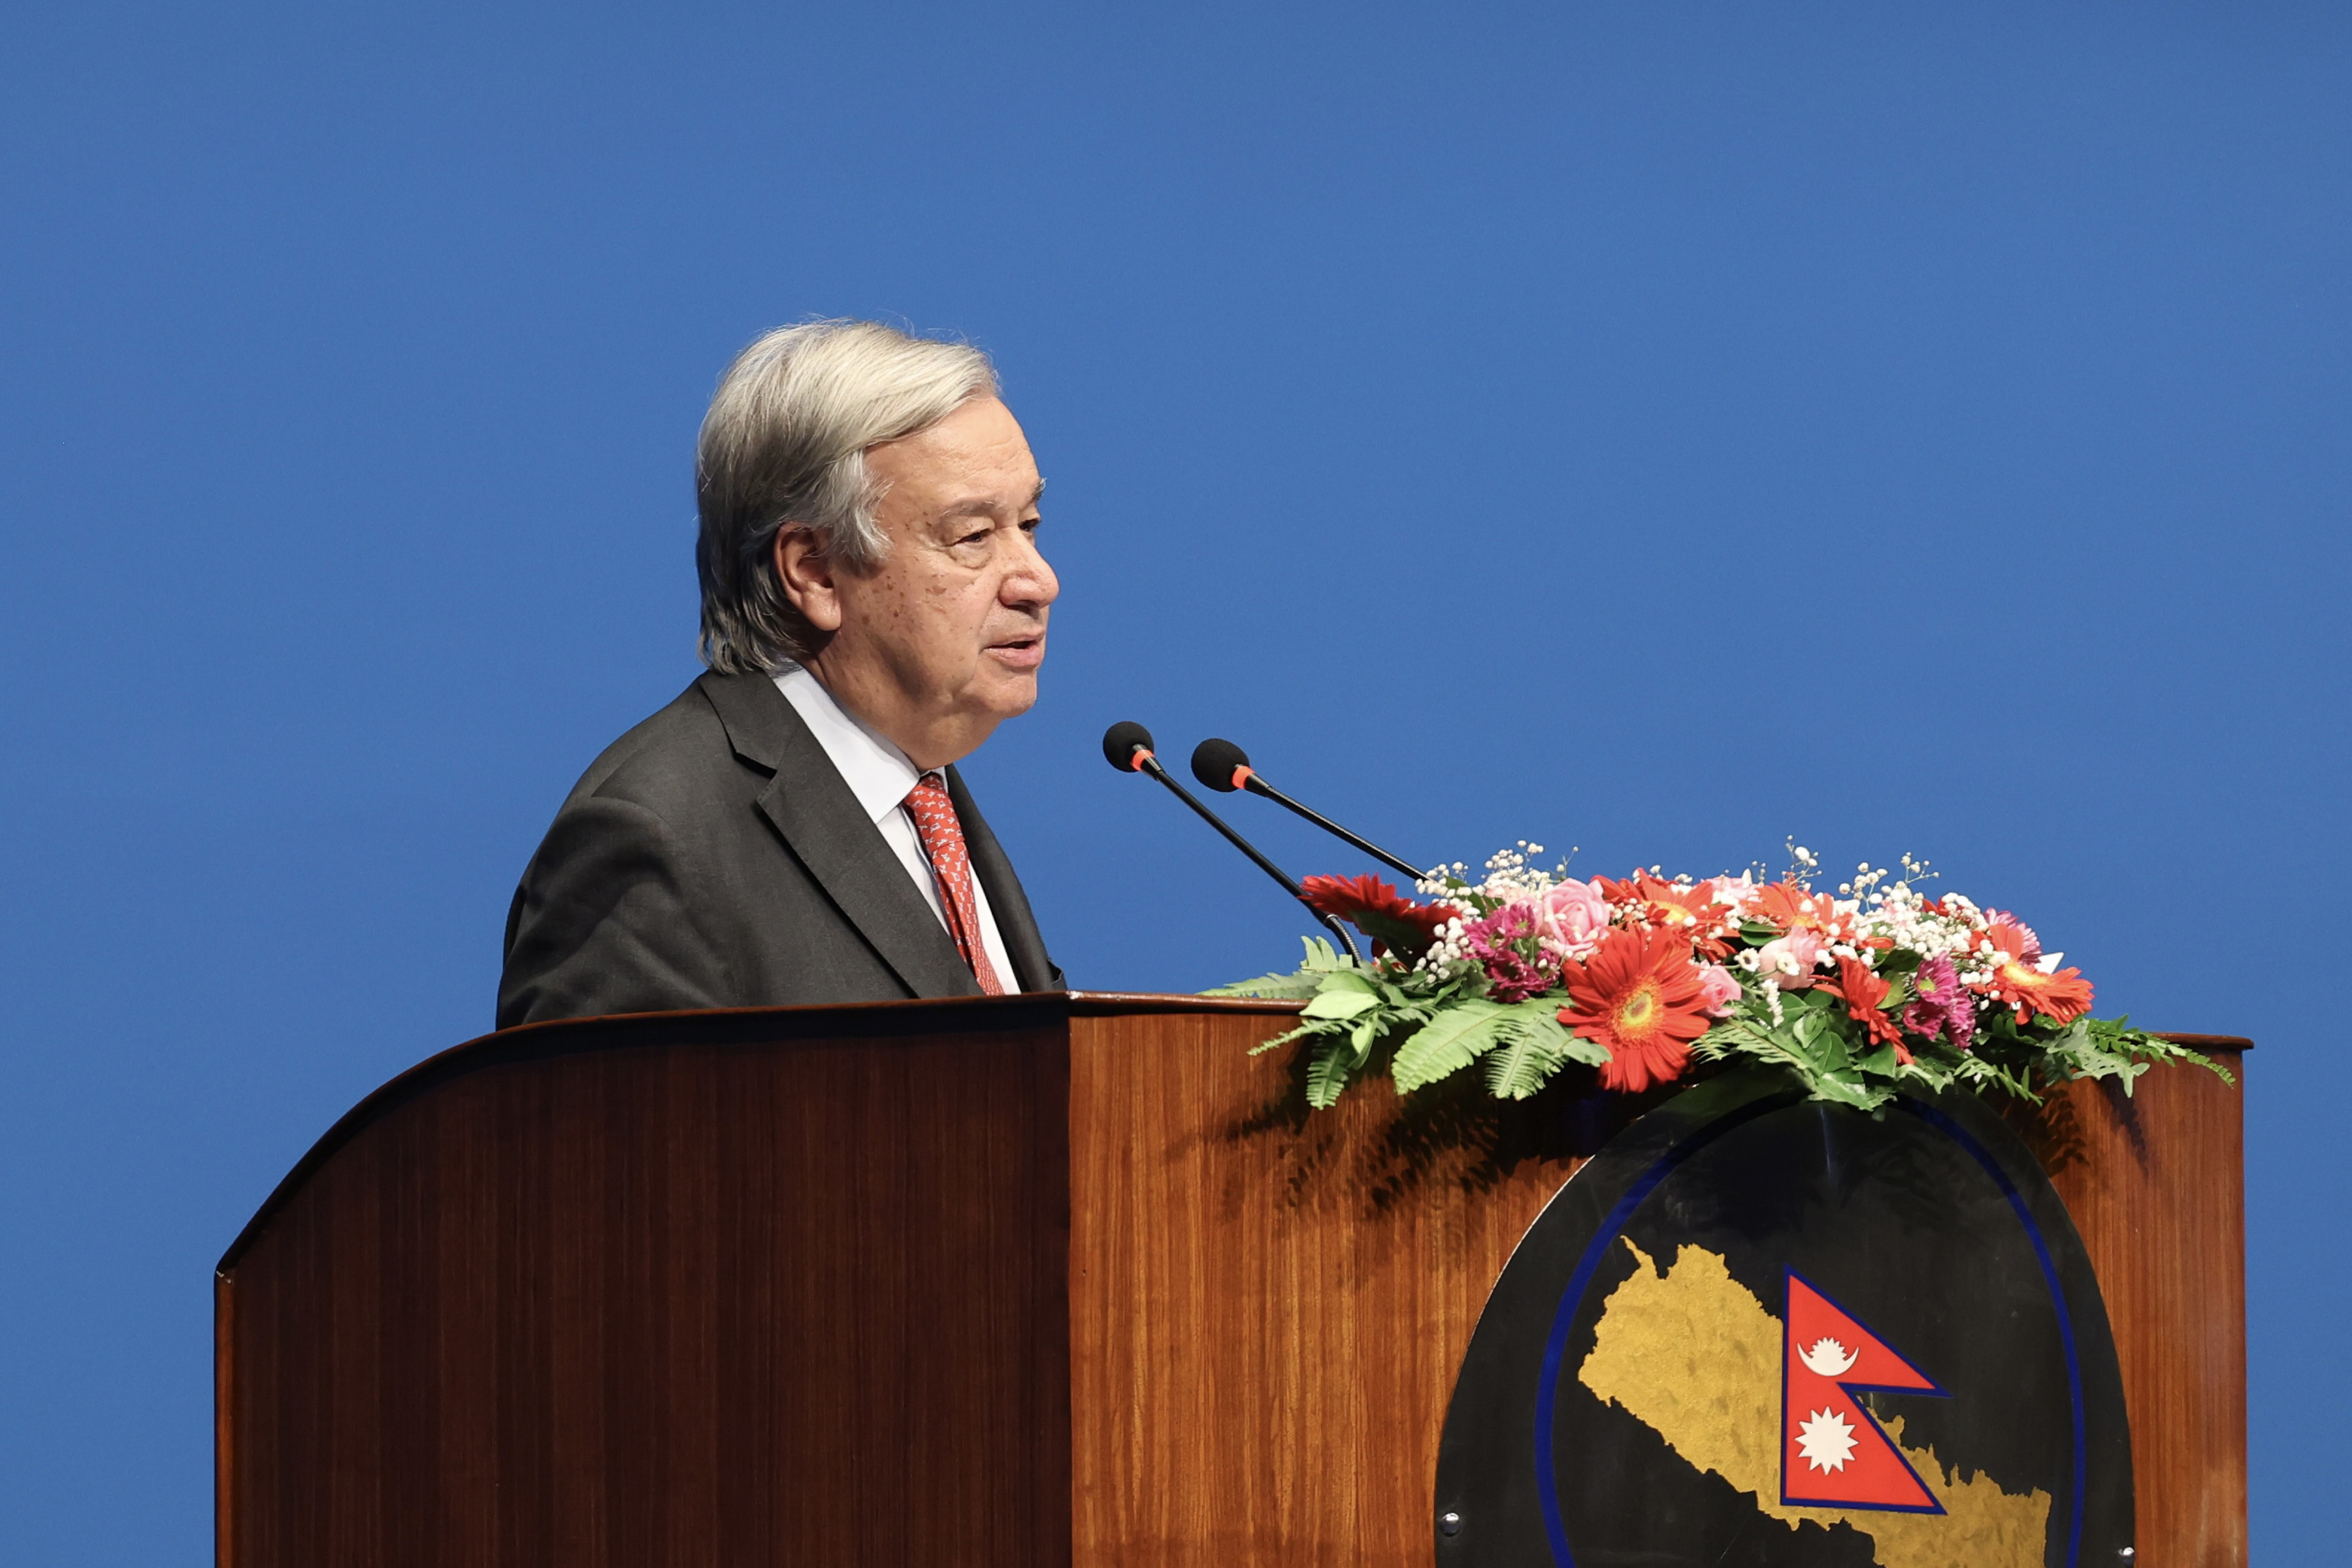 UN Secretary General delivers historic speech in Nepal’s parliament, says world can learn much from Nepal